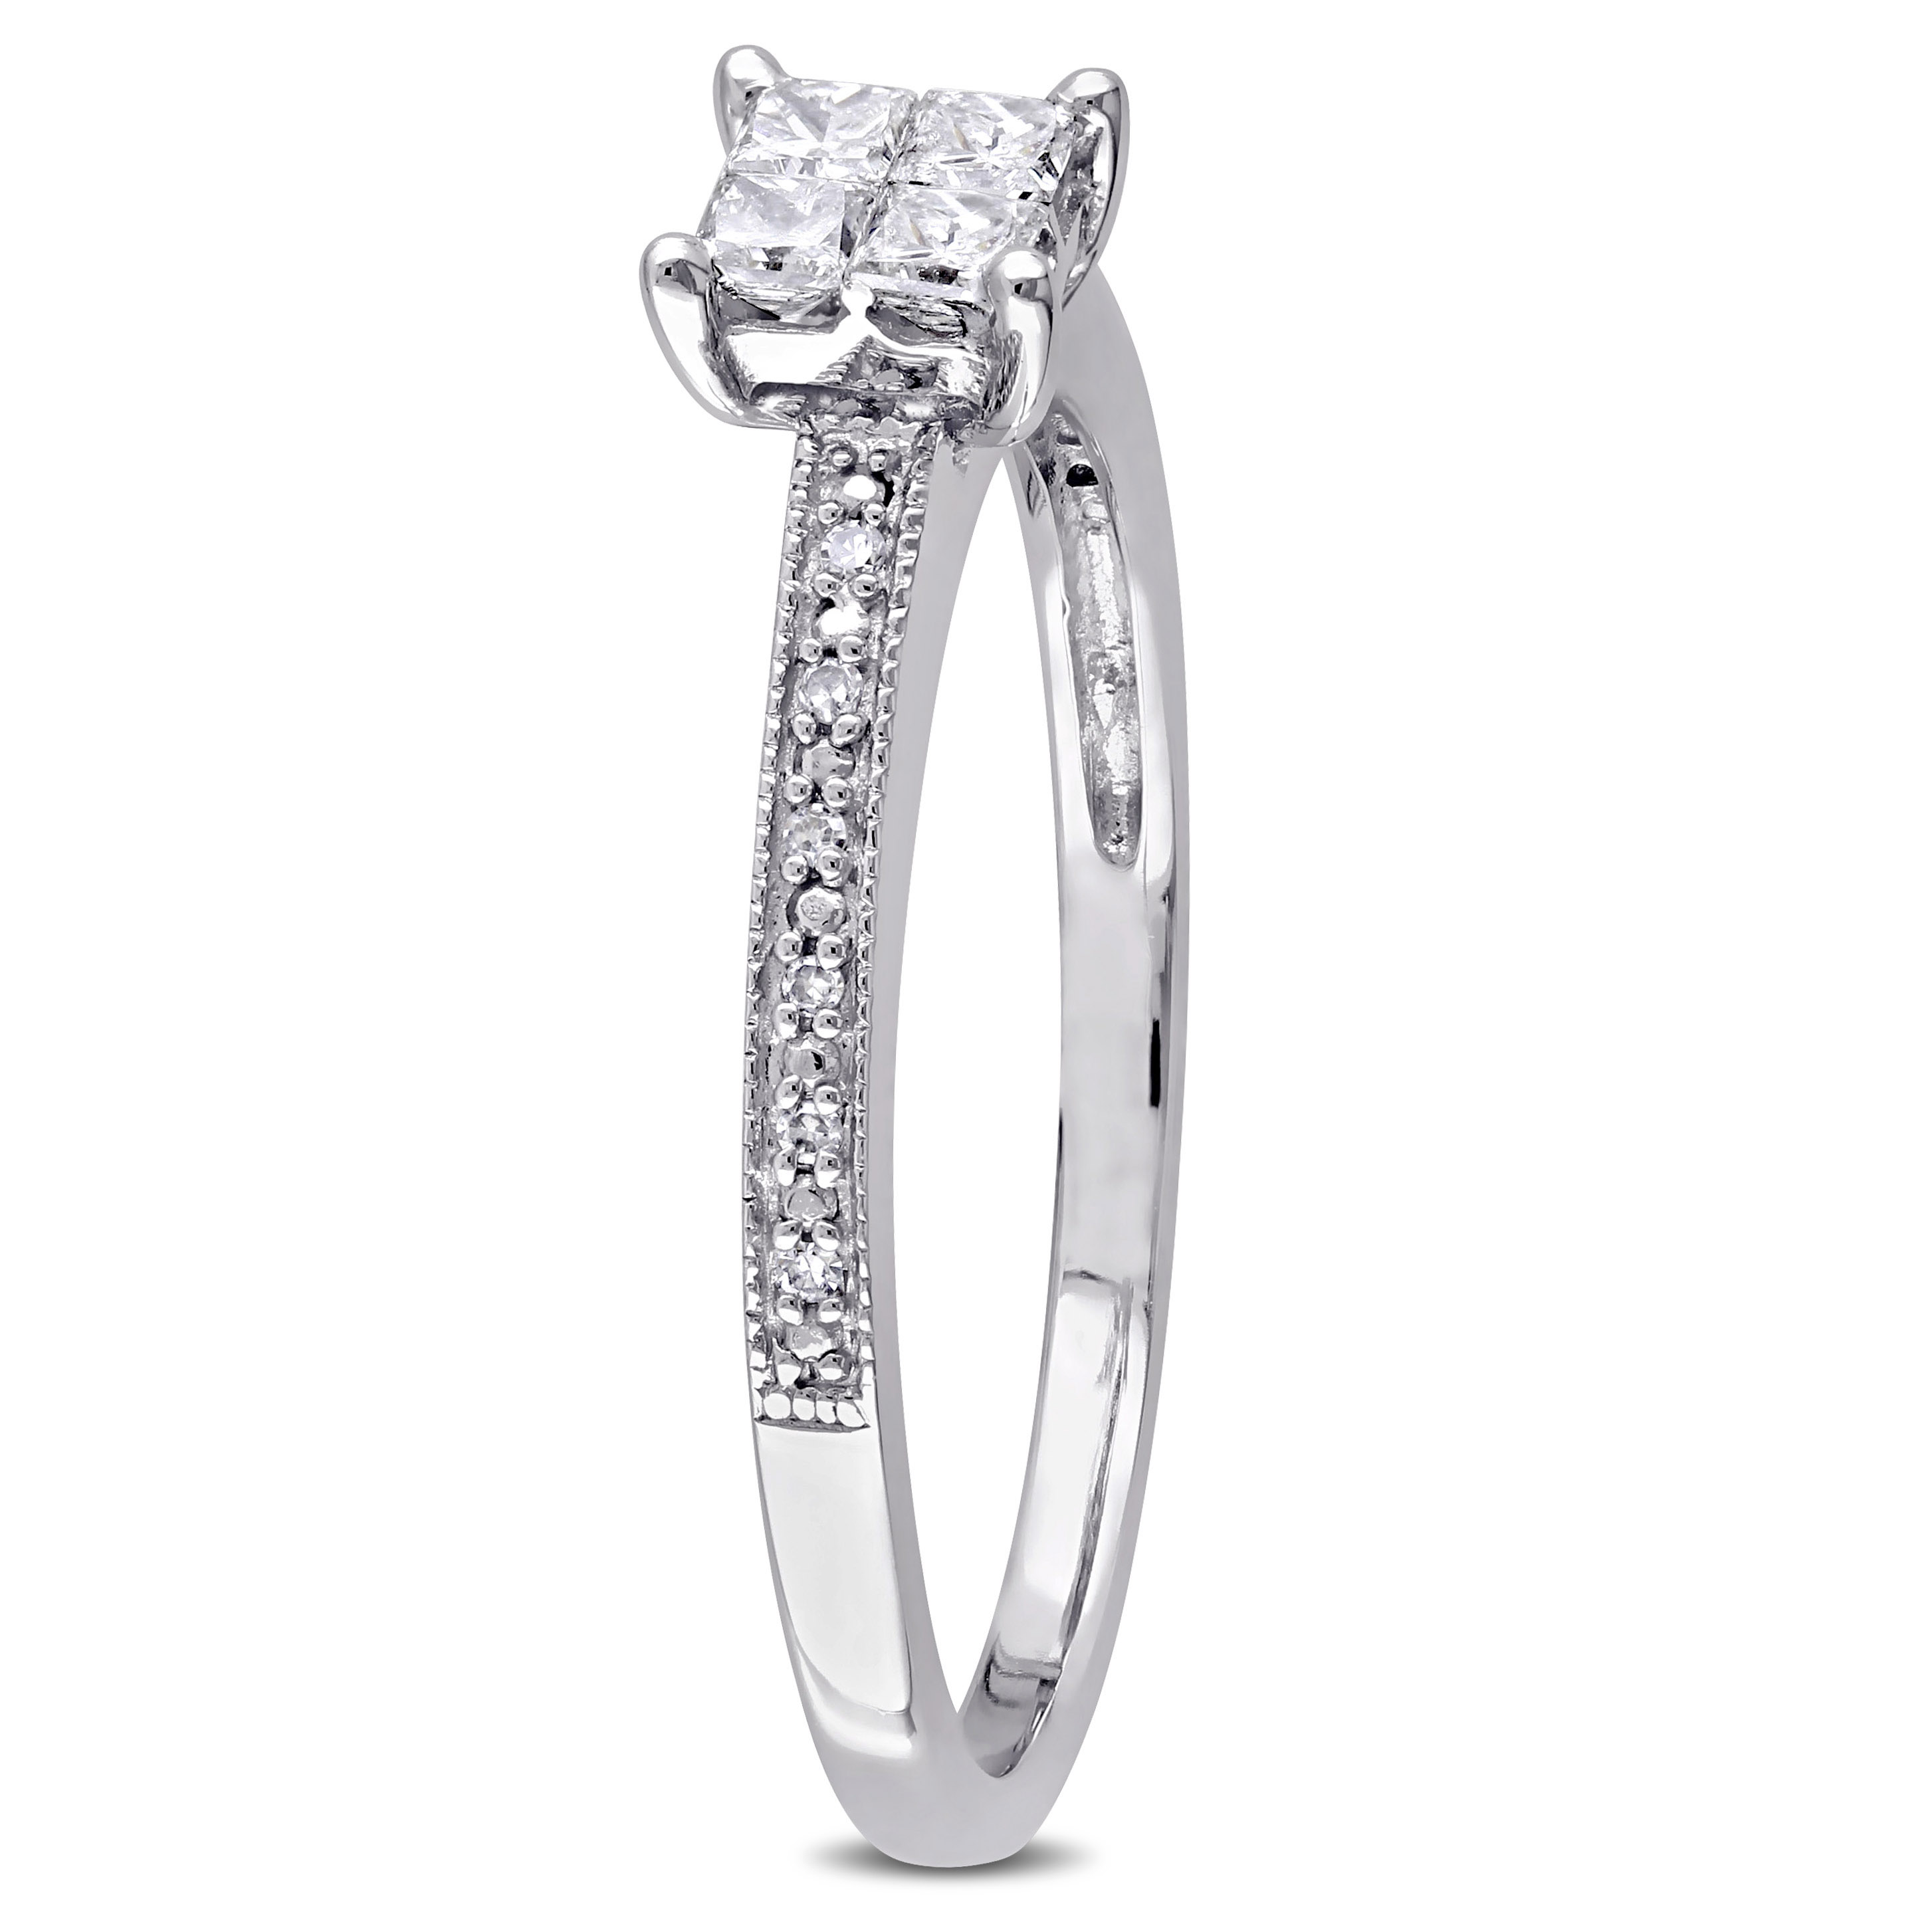 1/3 CT TW Princess Cut Quad and Round Diamond Engagement Ring in 10k White Gold